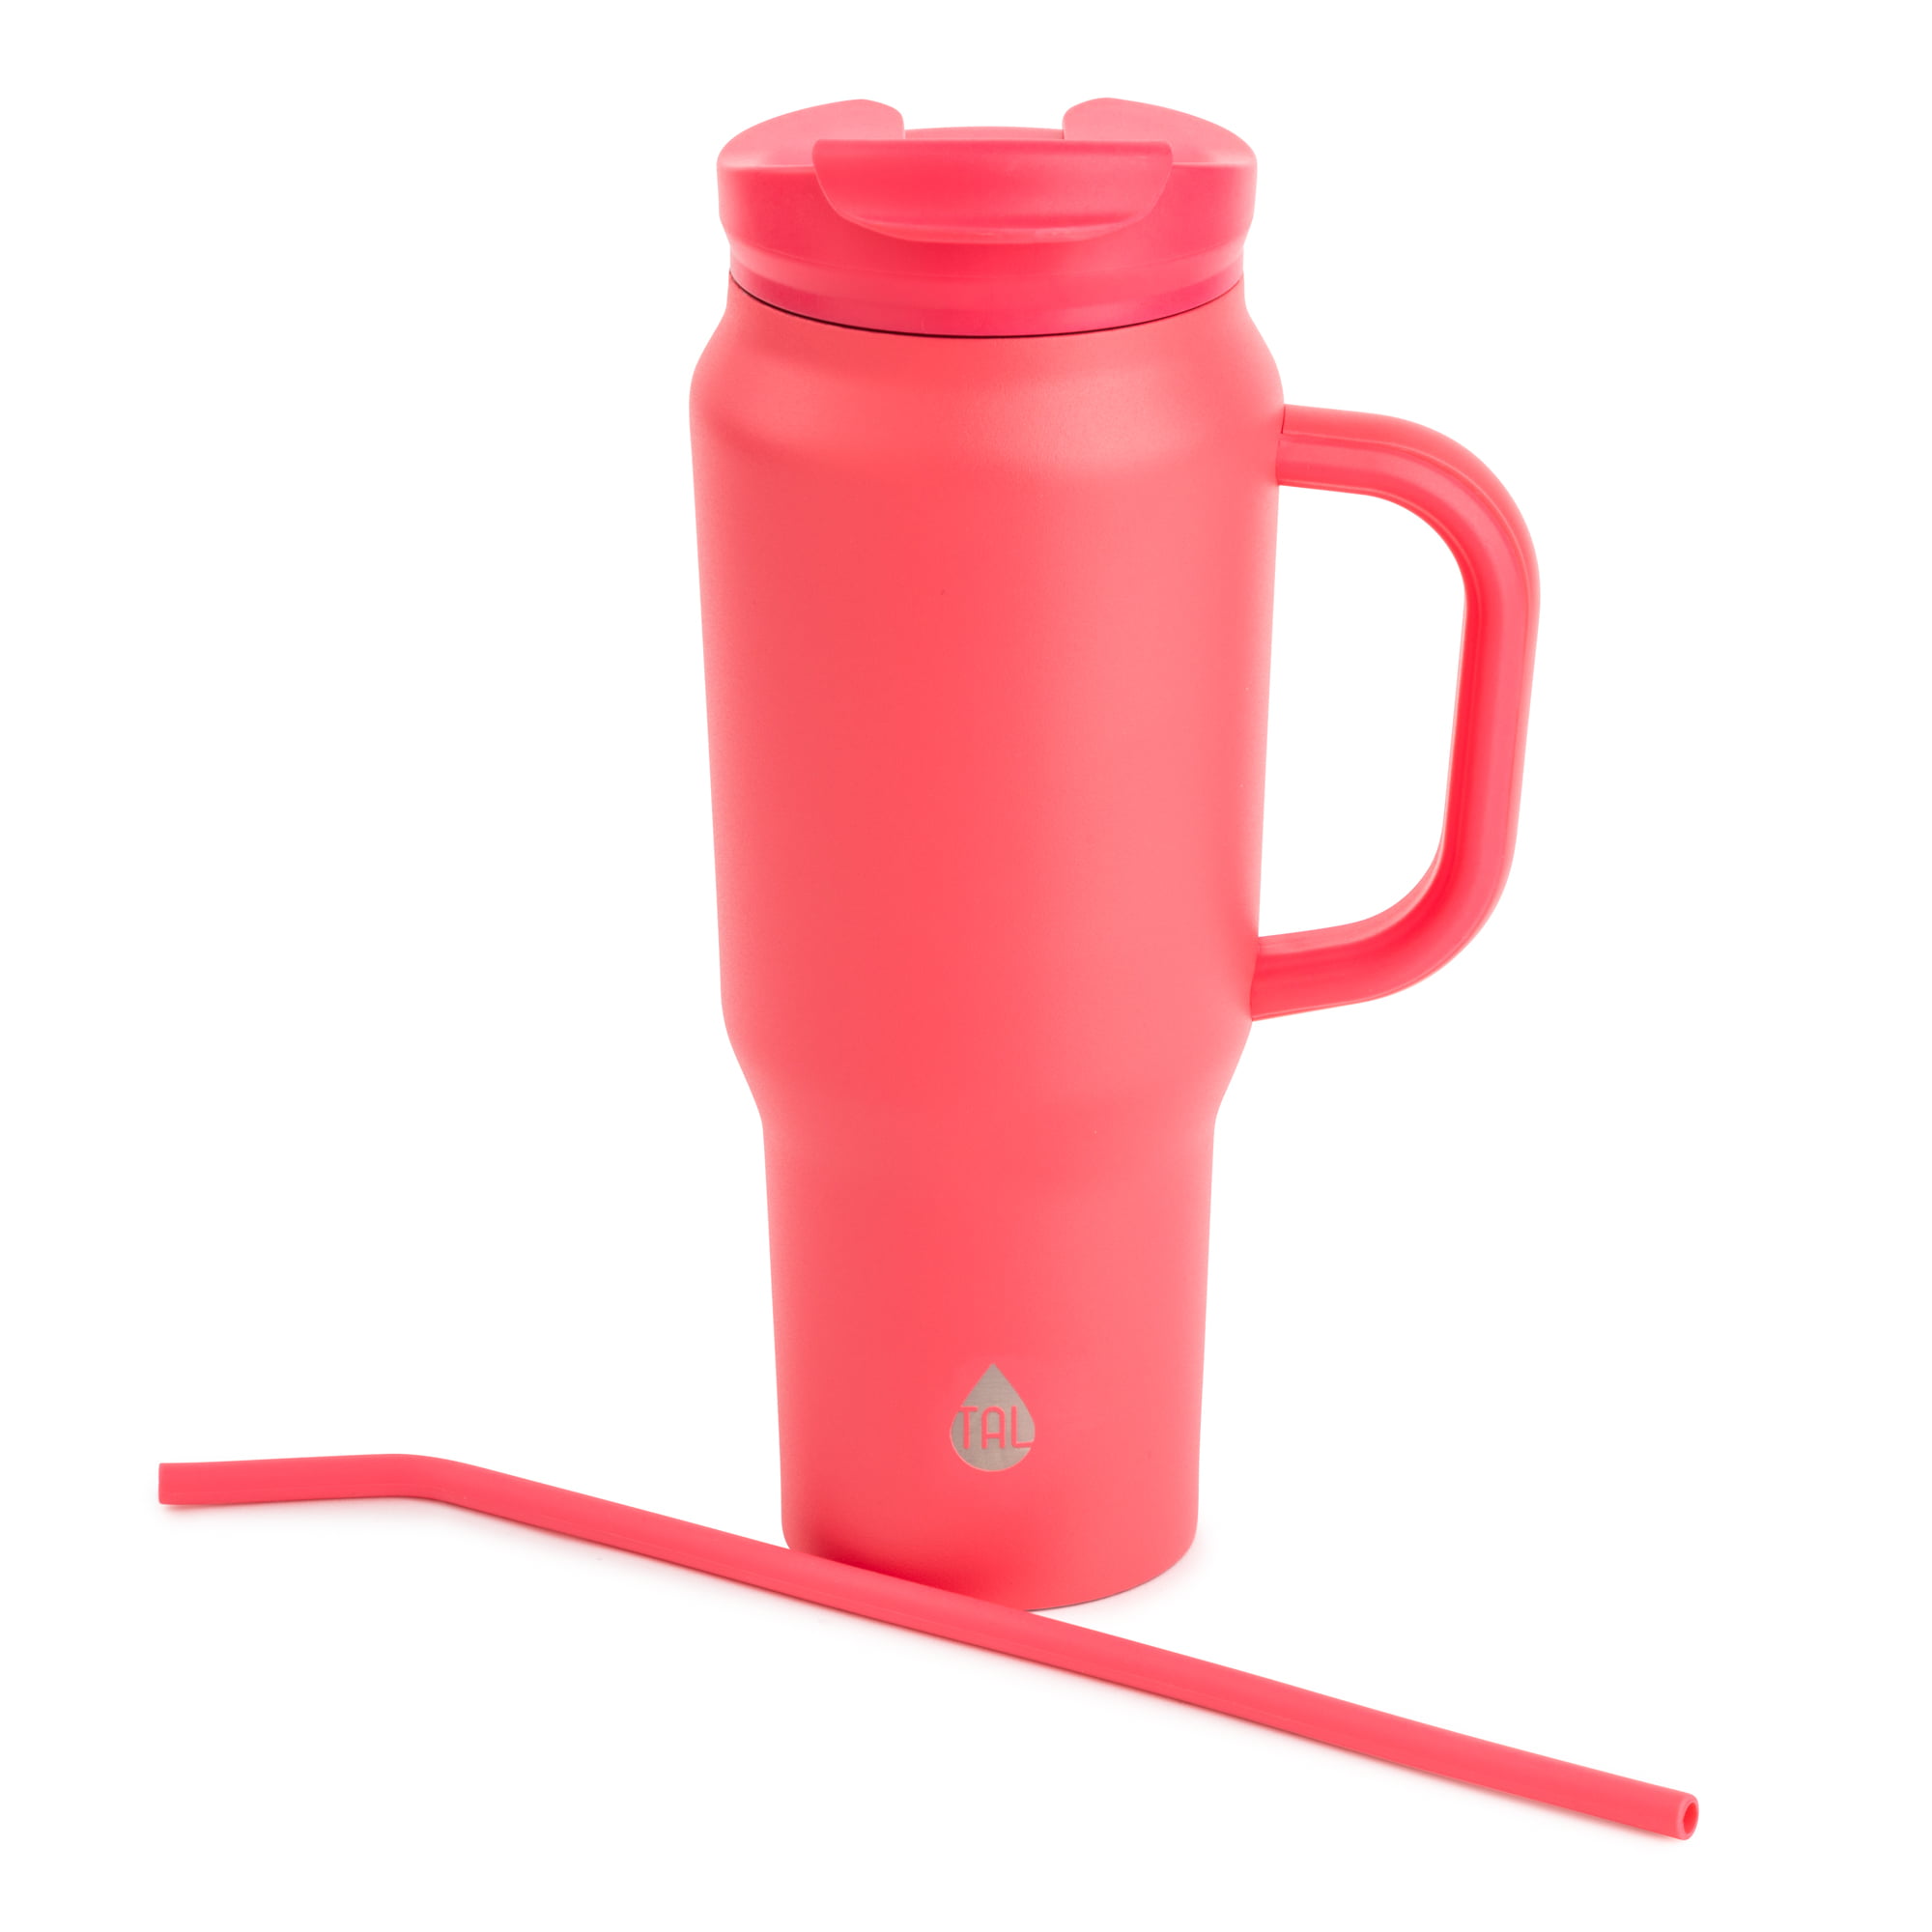 TAL stainless steel 30-oz water bottle with straw for $15 - Clark Deals